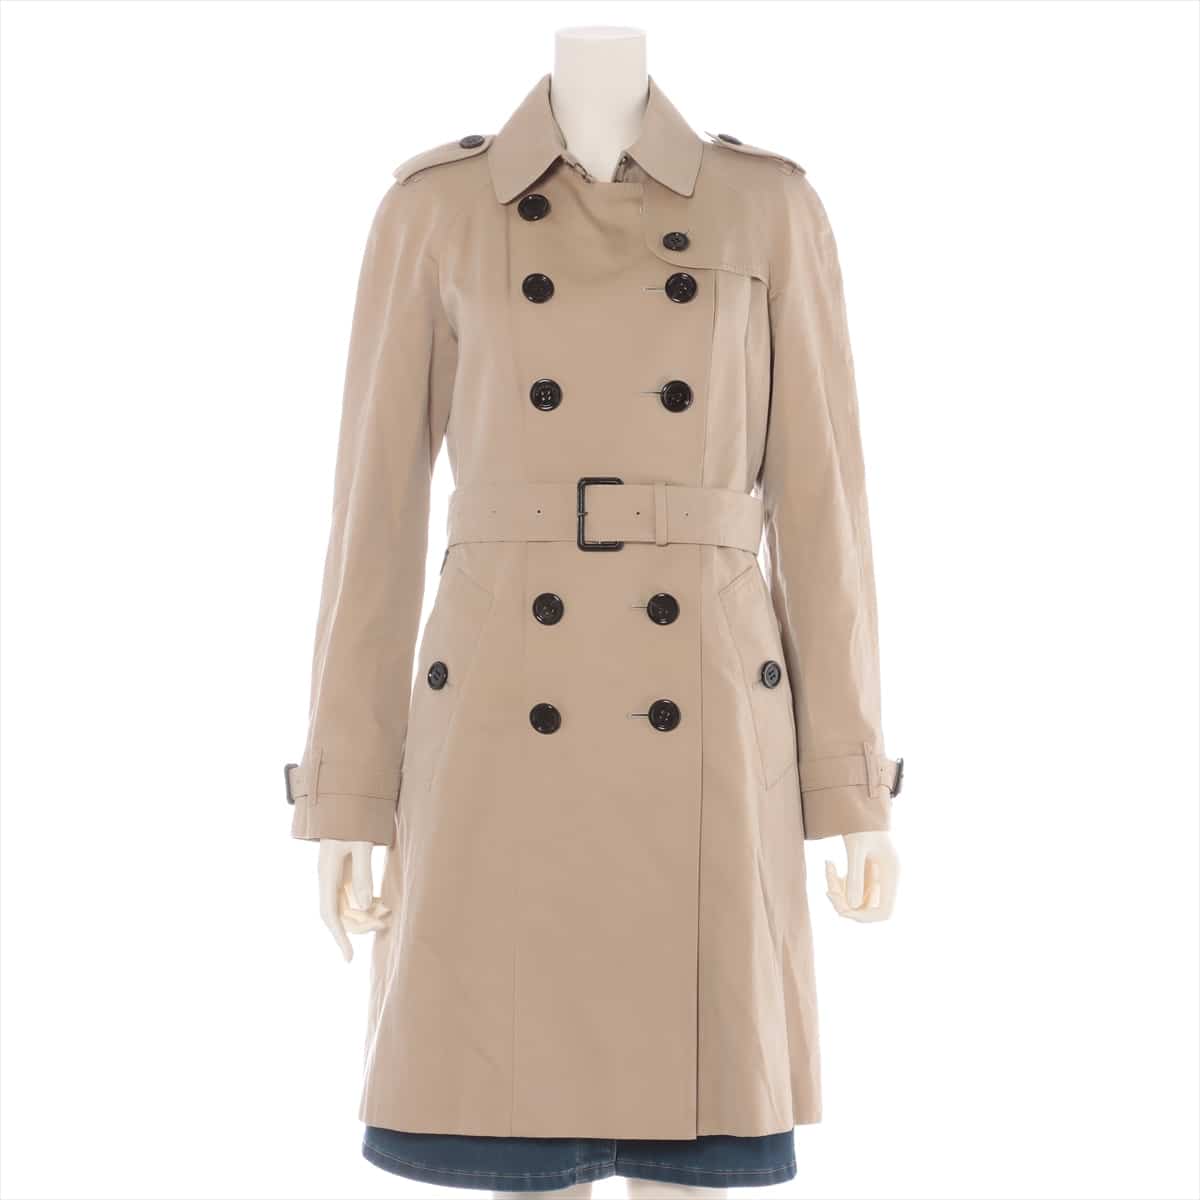 Burberry London Cotton Trench coat 40 Ladies' Beige Lined